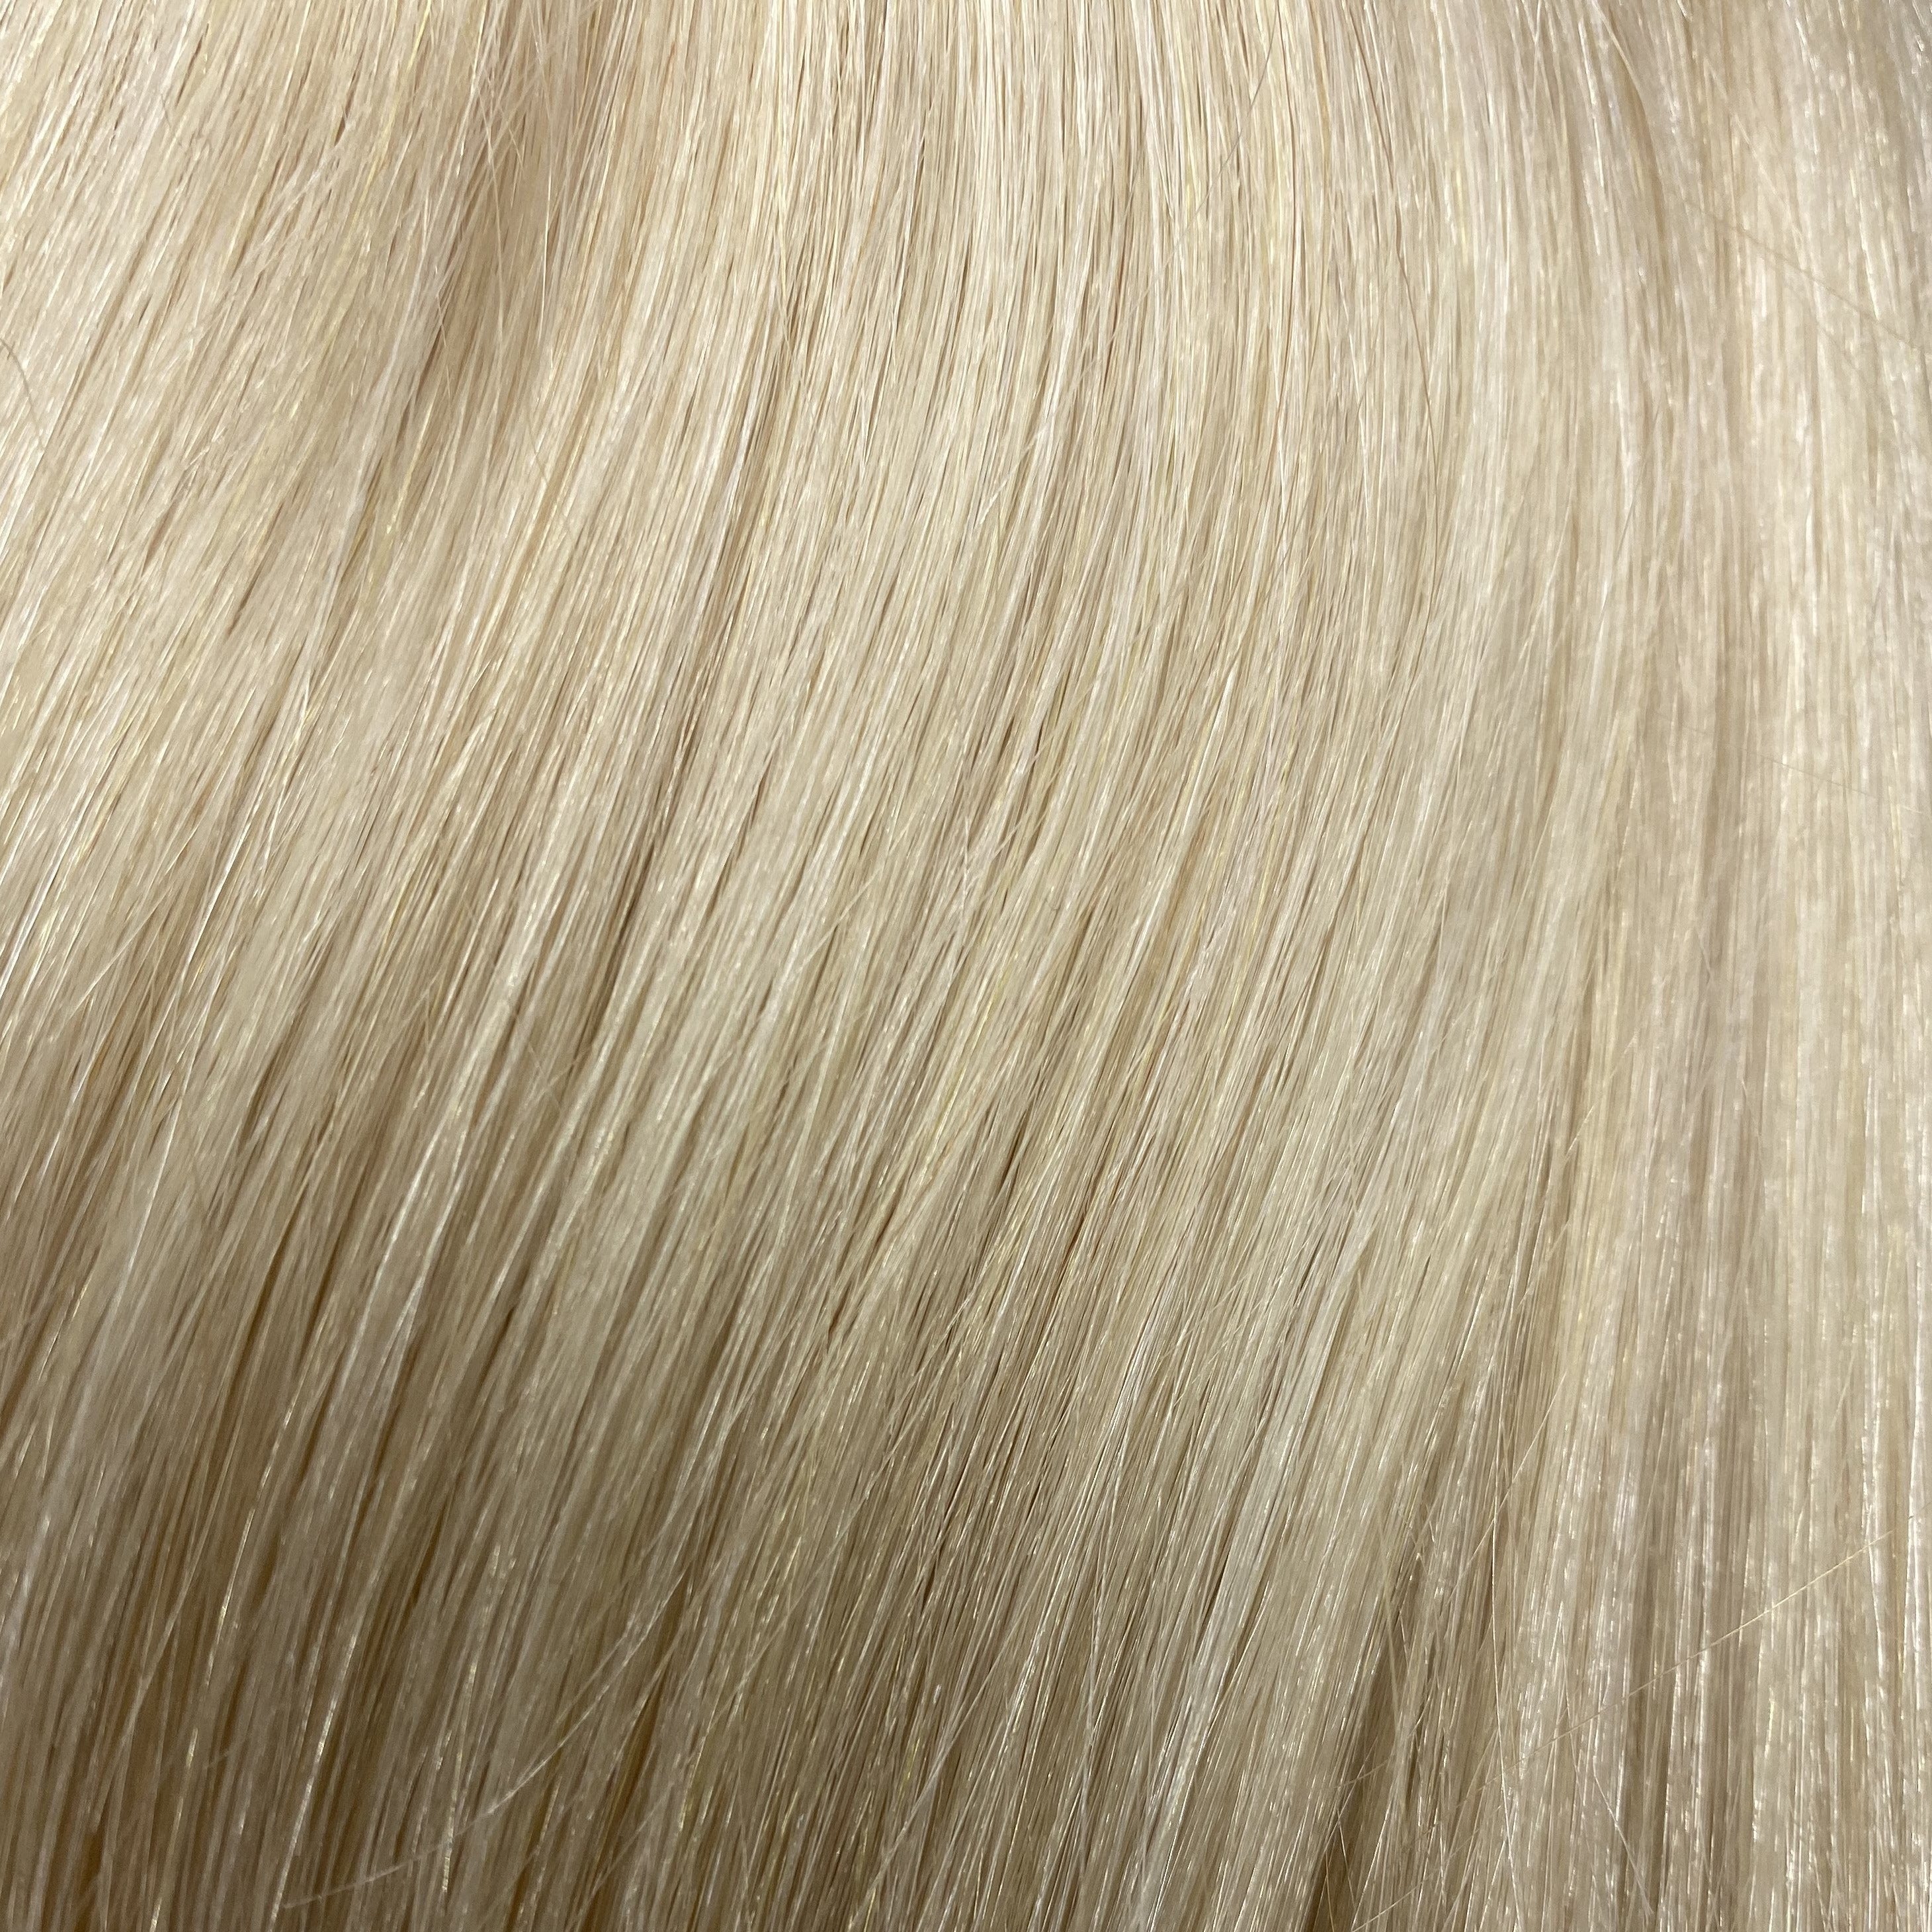 Velo #1002- 20 Inches - Very Light Ash Blonde - 175 Grams | clip in hair extensions